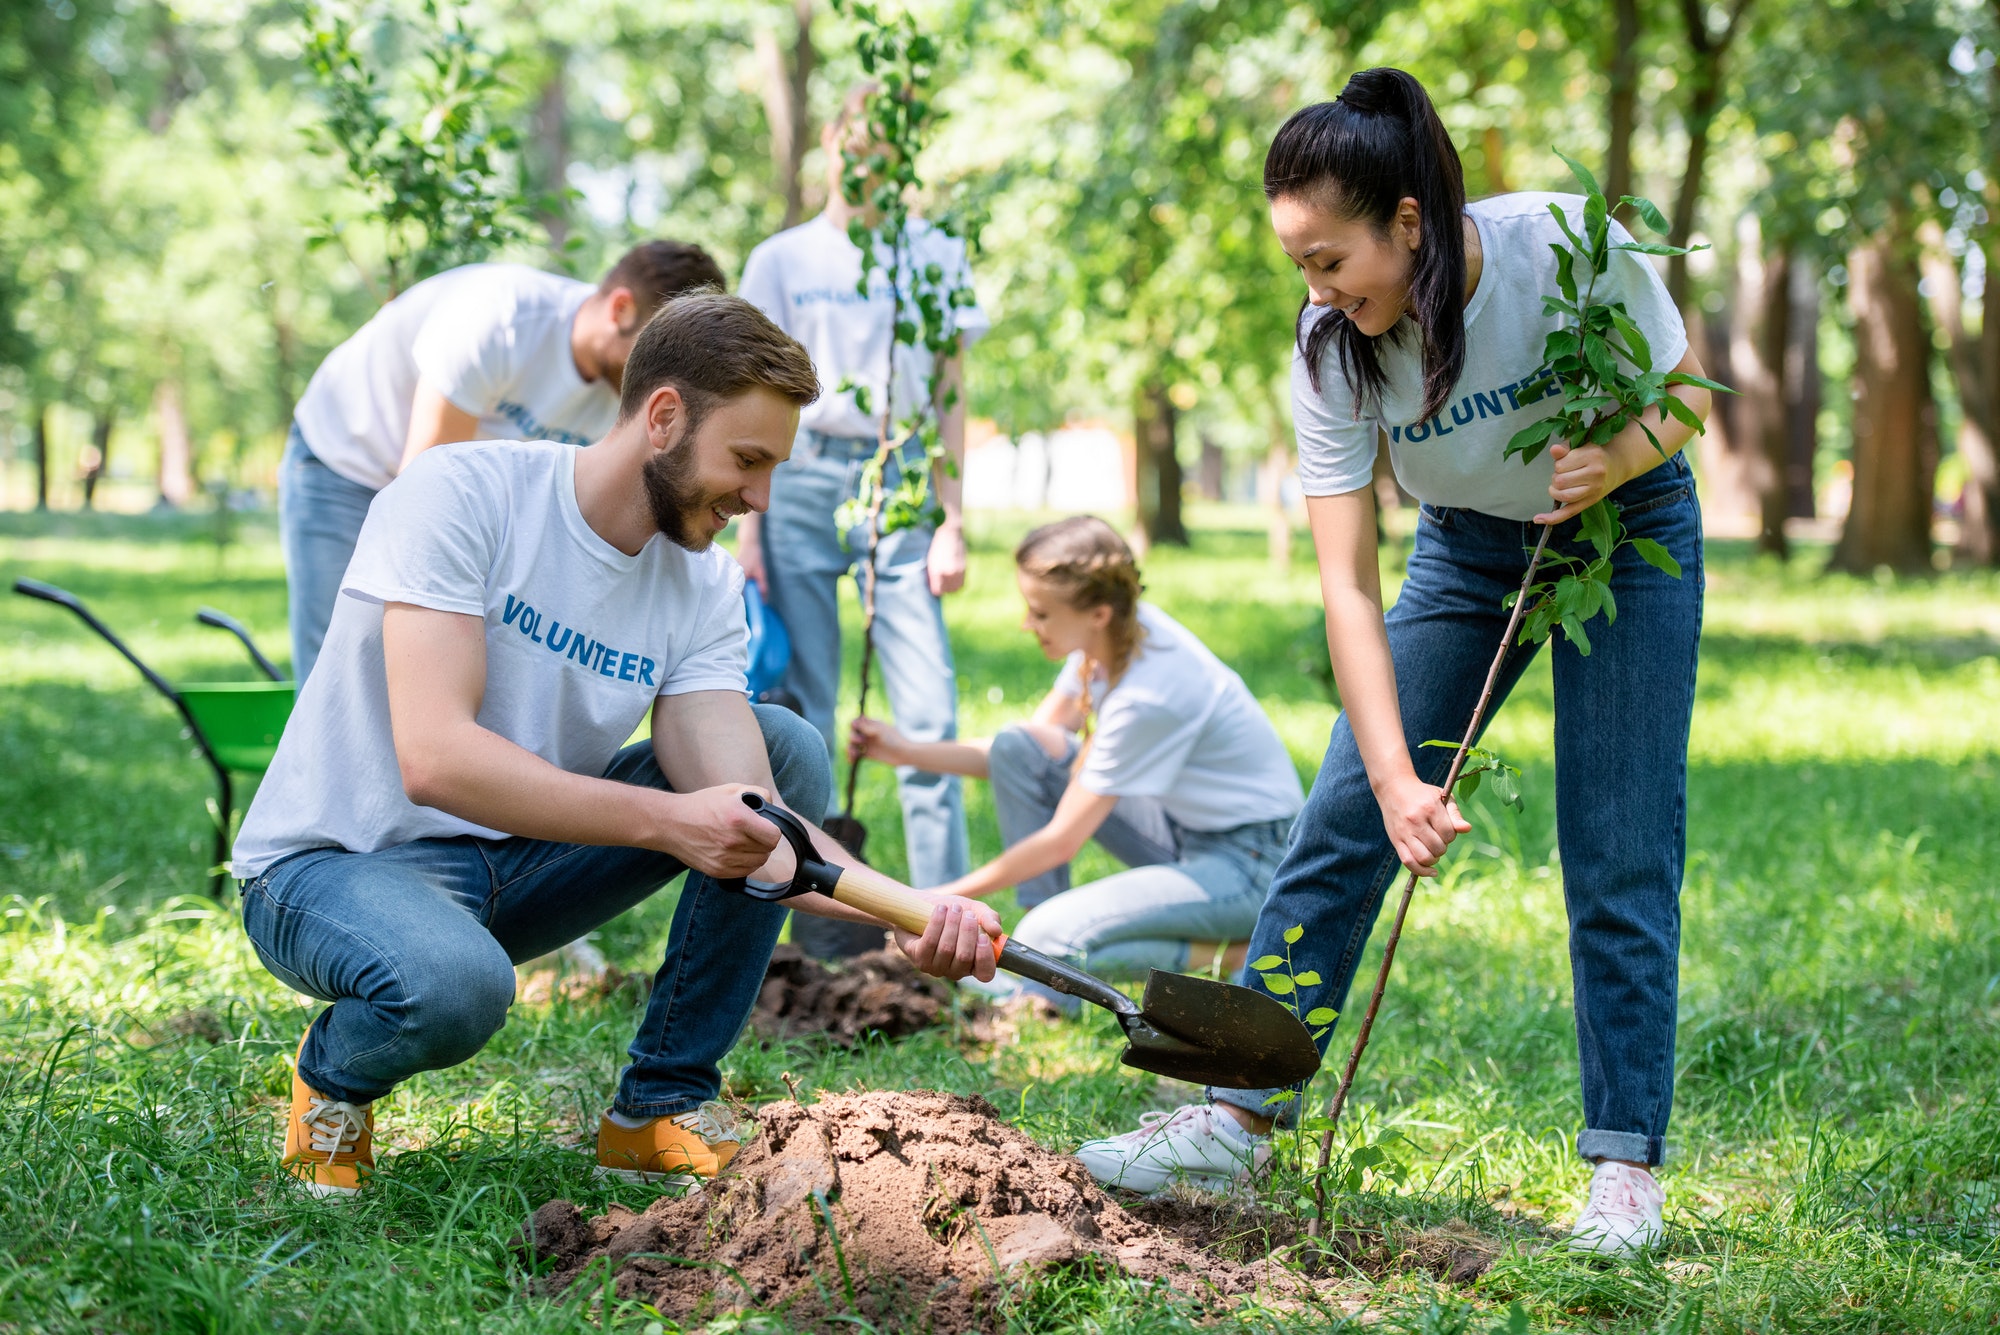 young-volunteers-planting-trees-in-green-park-together.jpg